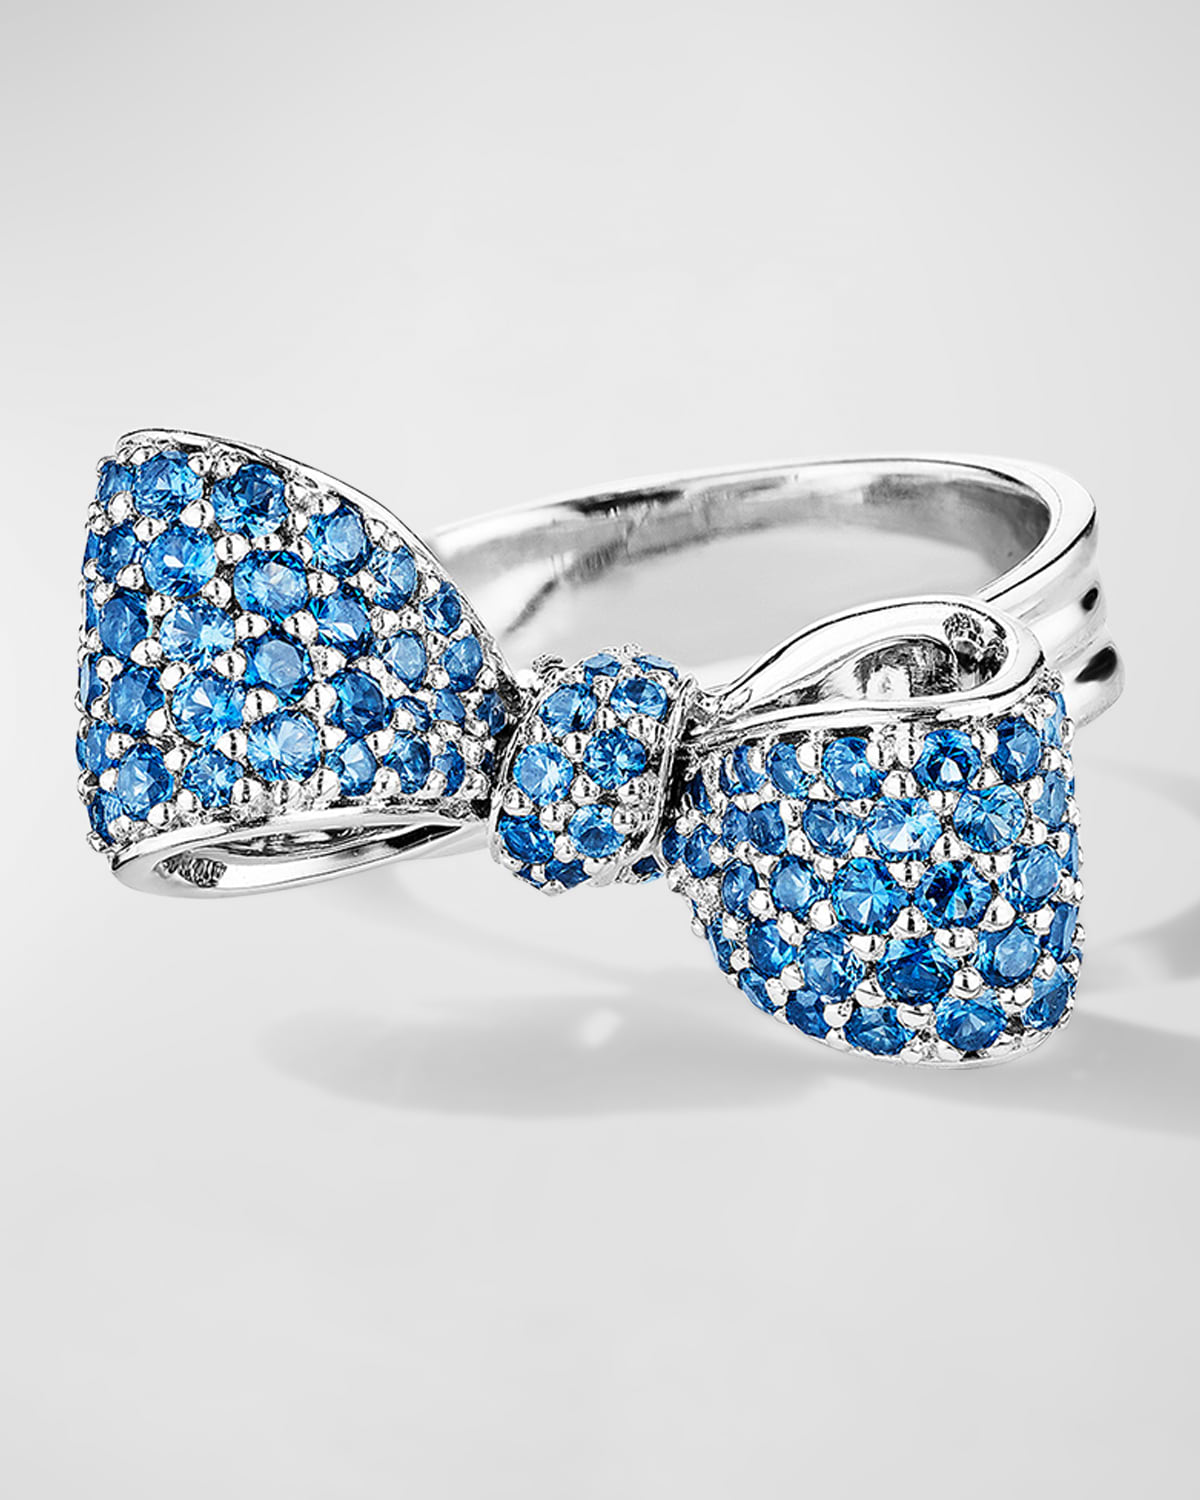 18K White Gold Small Bow Ring with Blue Sapphires, Size 7